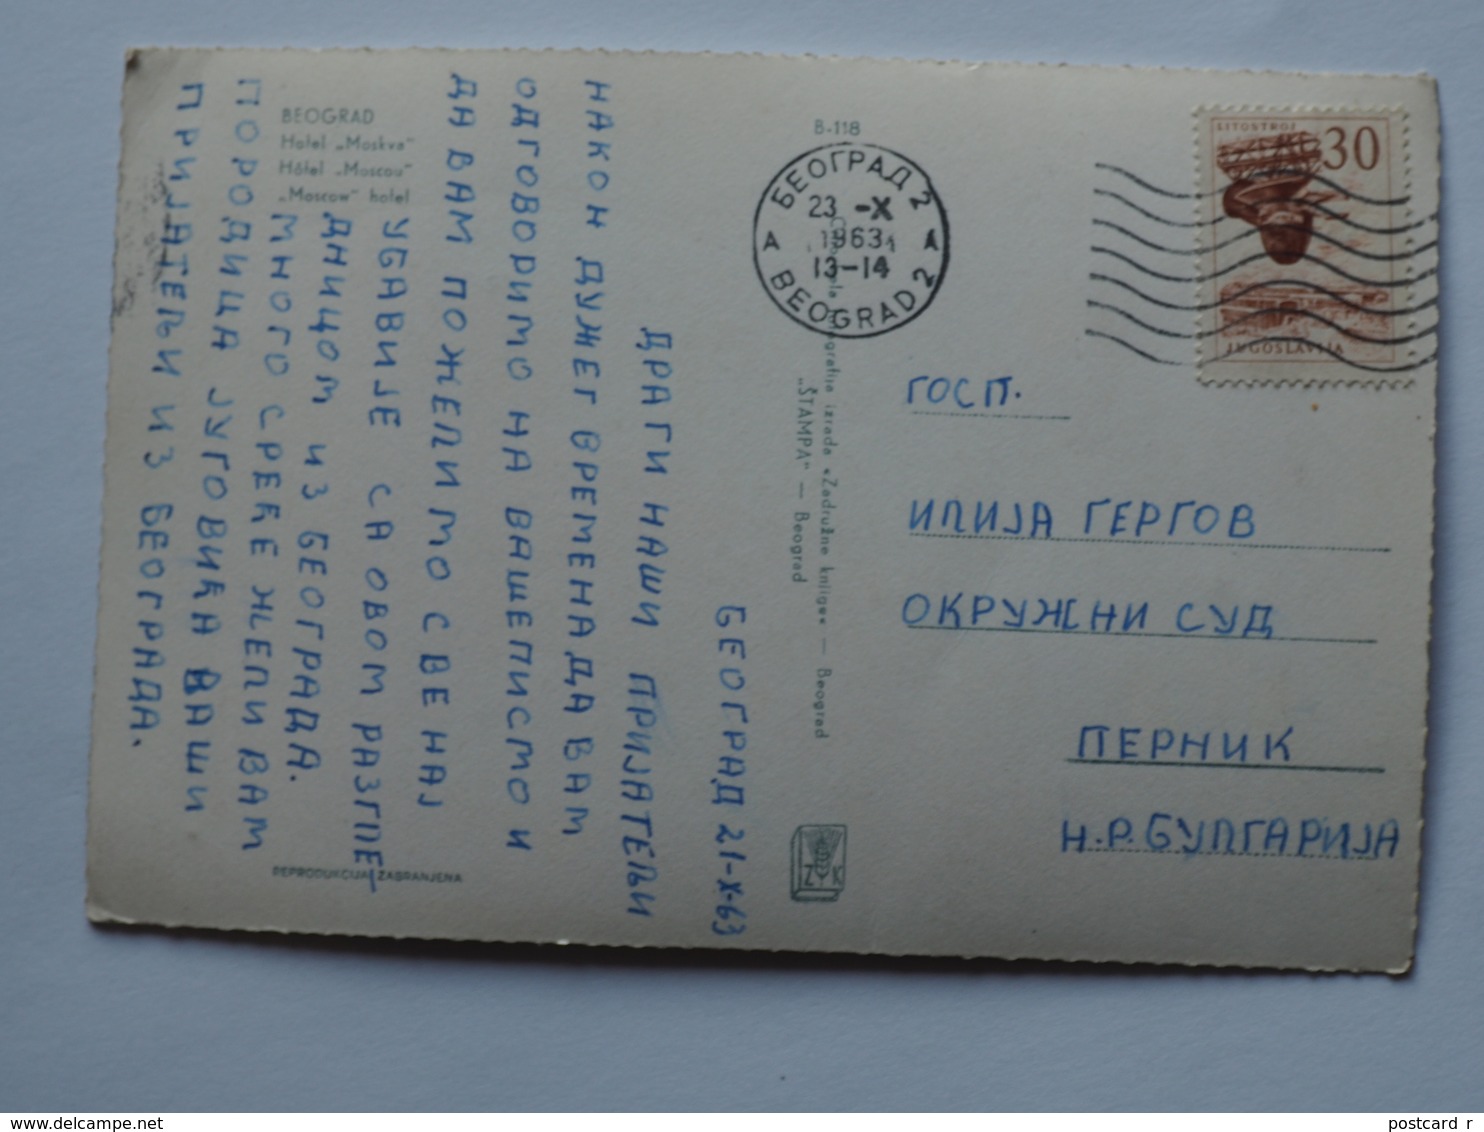 Serbia Beograd Hotel Moscow Stamp 1963      A 183 - Serbien